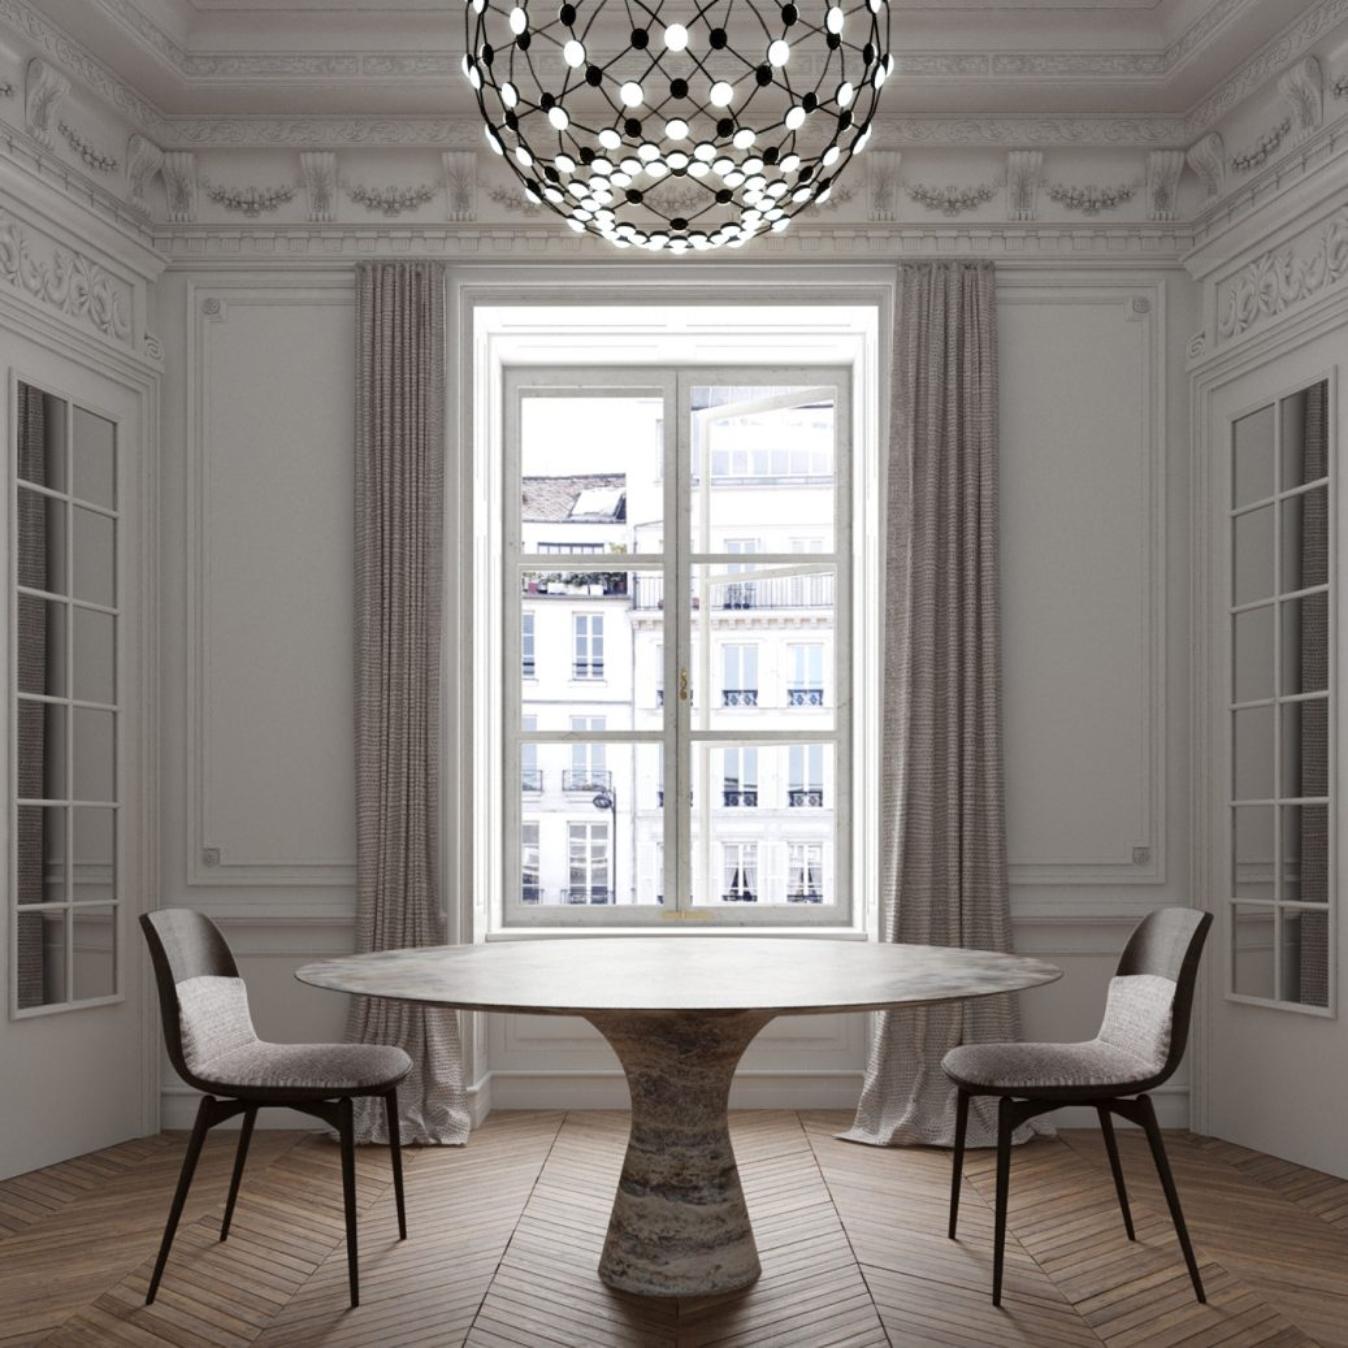 Travertino silver refined contemporary marble dining table

Angelo is the essence of a round table in natural stone, a sculptural shape in robust material with elegant lines and refined finishes.

The collection consists of a round/oval dining